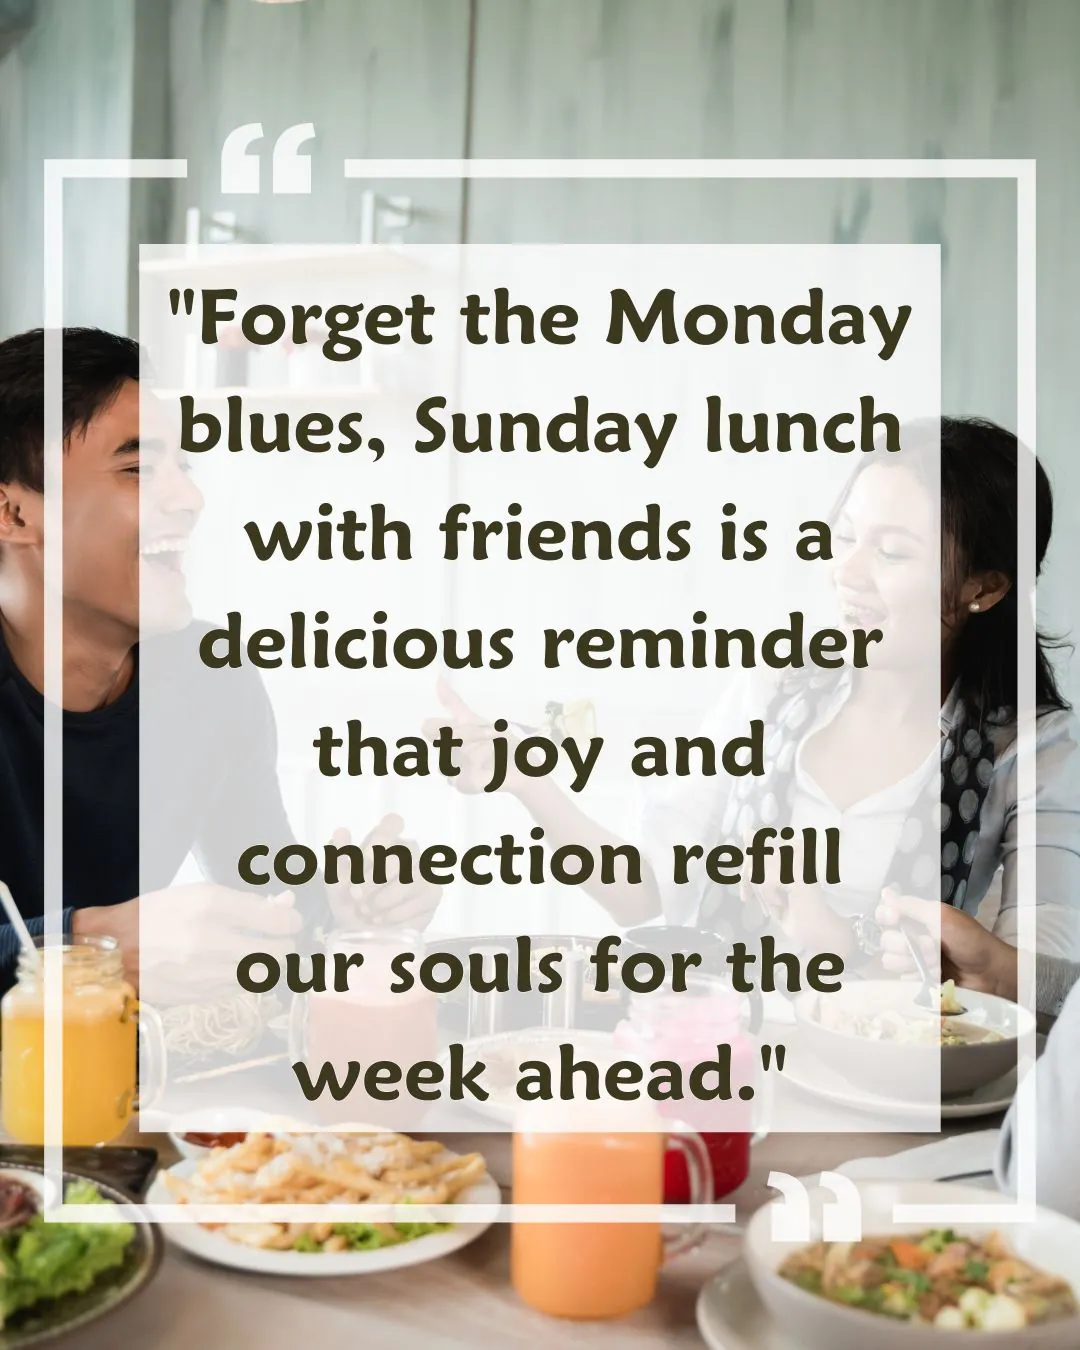 Sunday Lunch with friends quote with Image